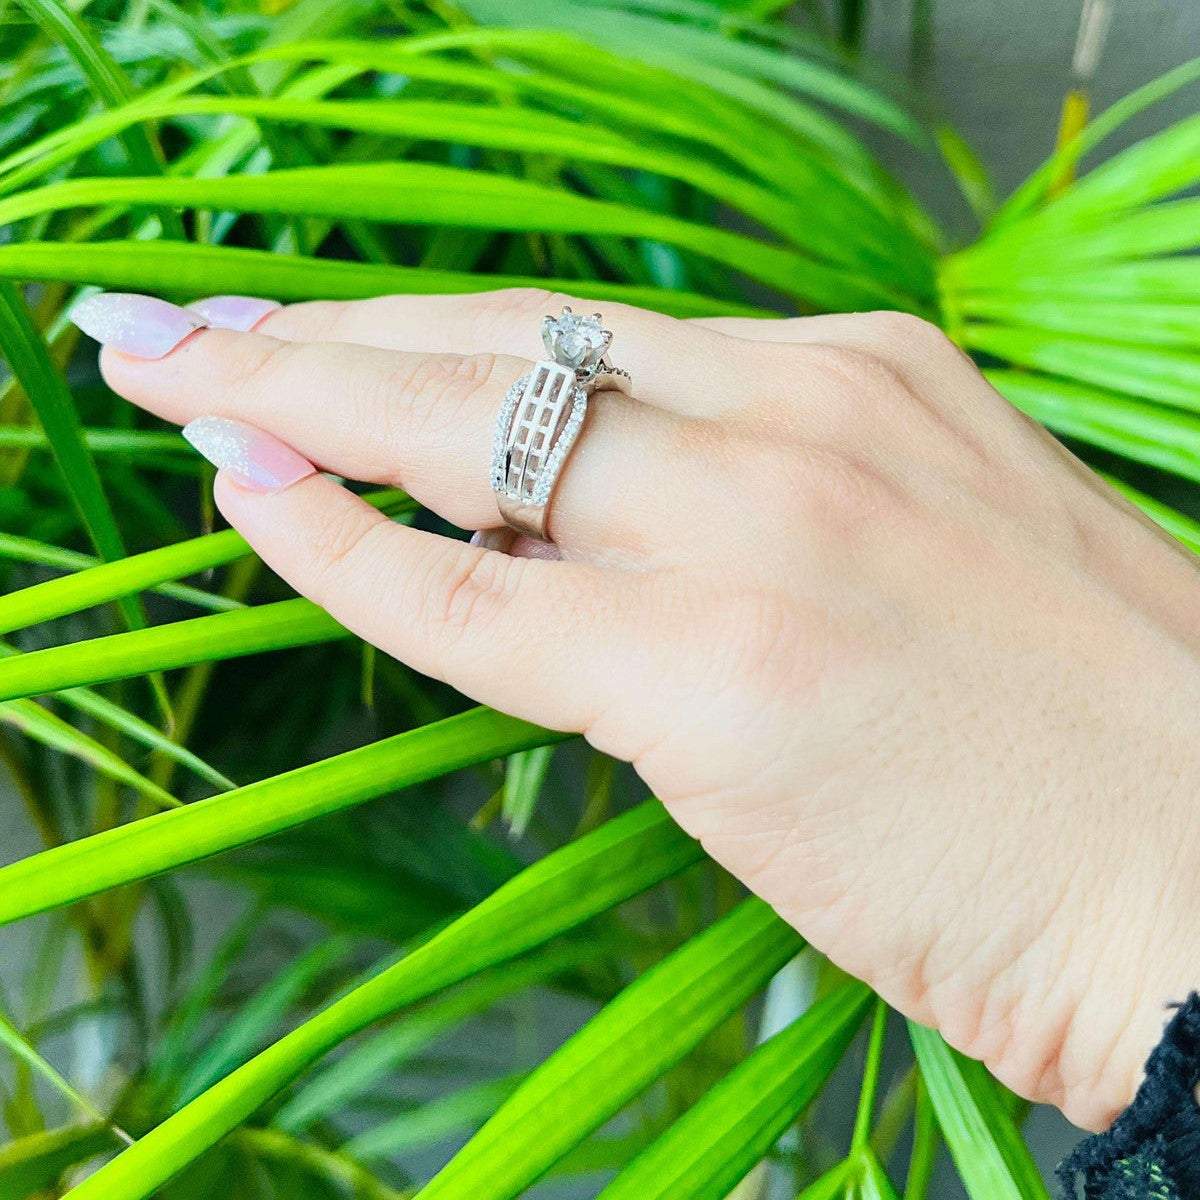 Vs sterling silver cocktail ring 128